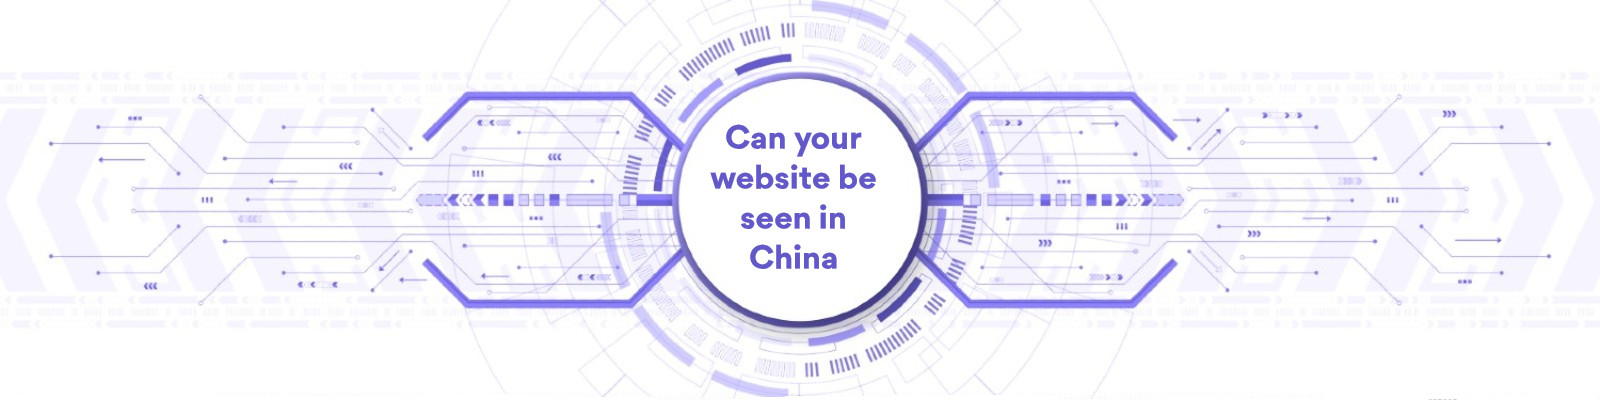 Can your website be seen in China?